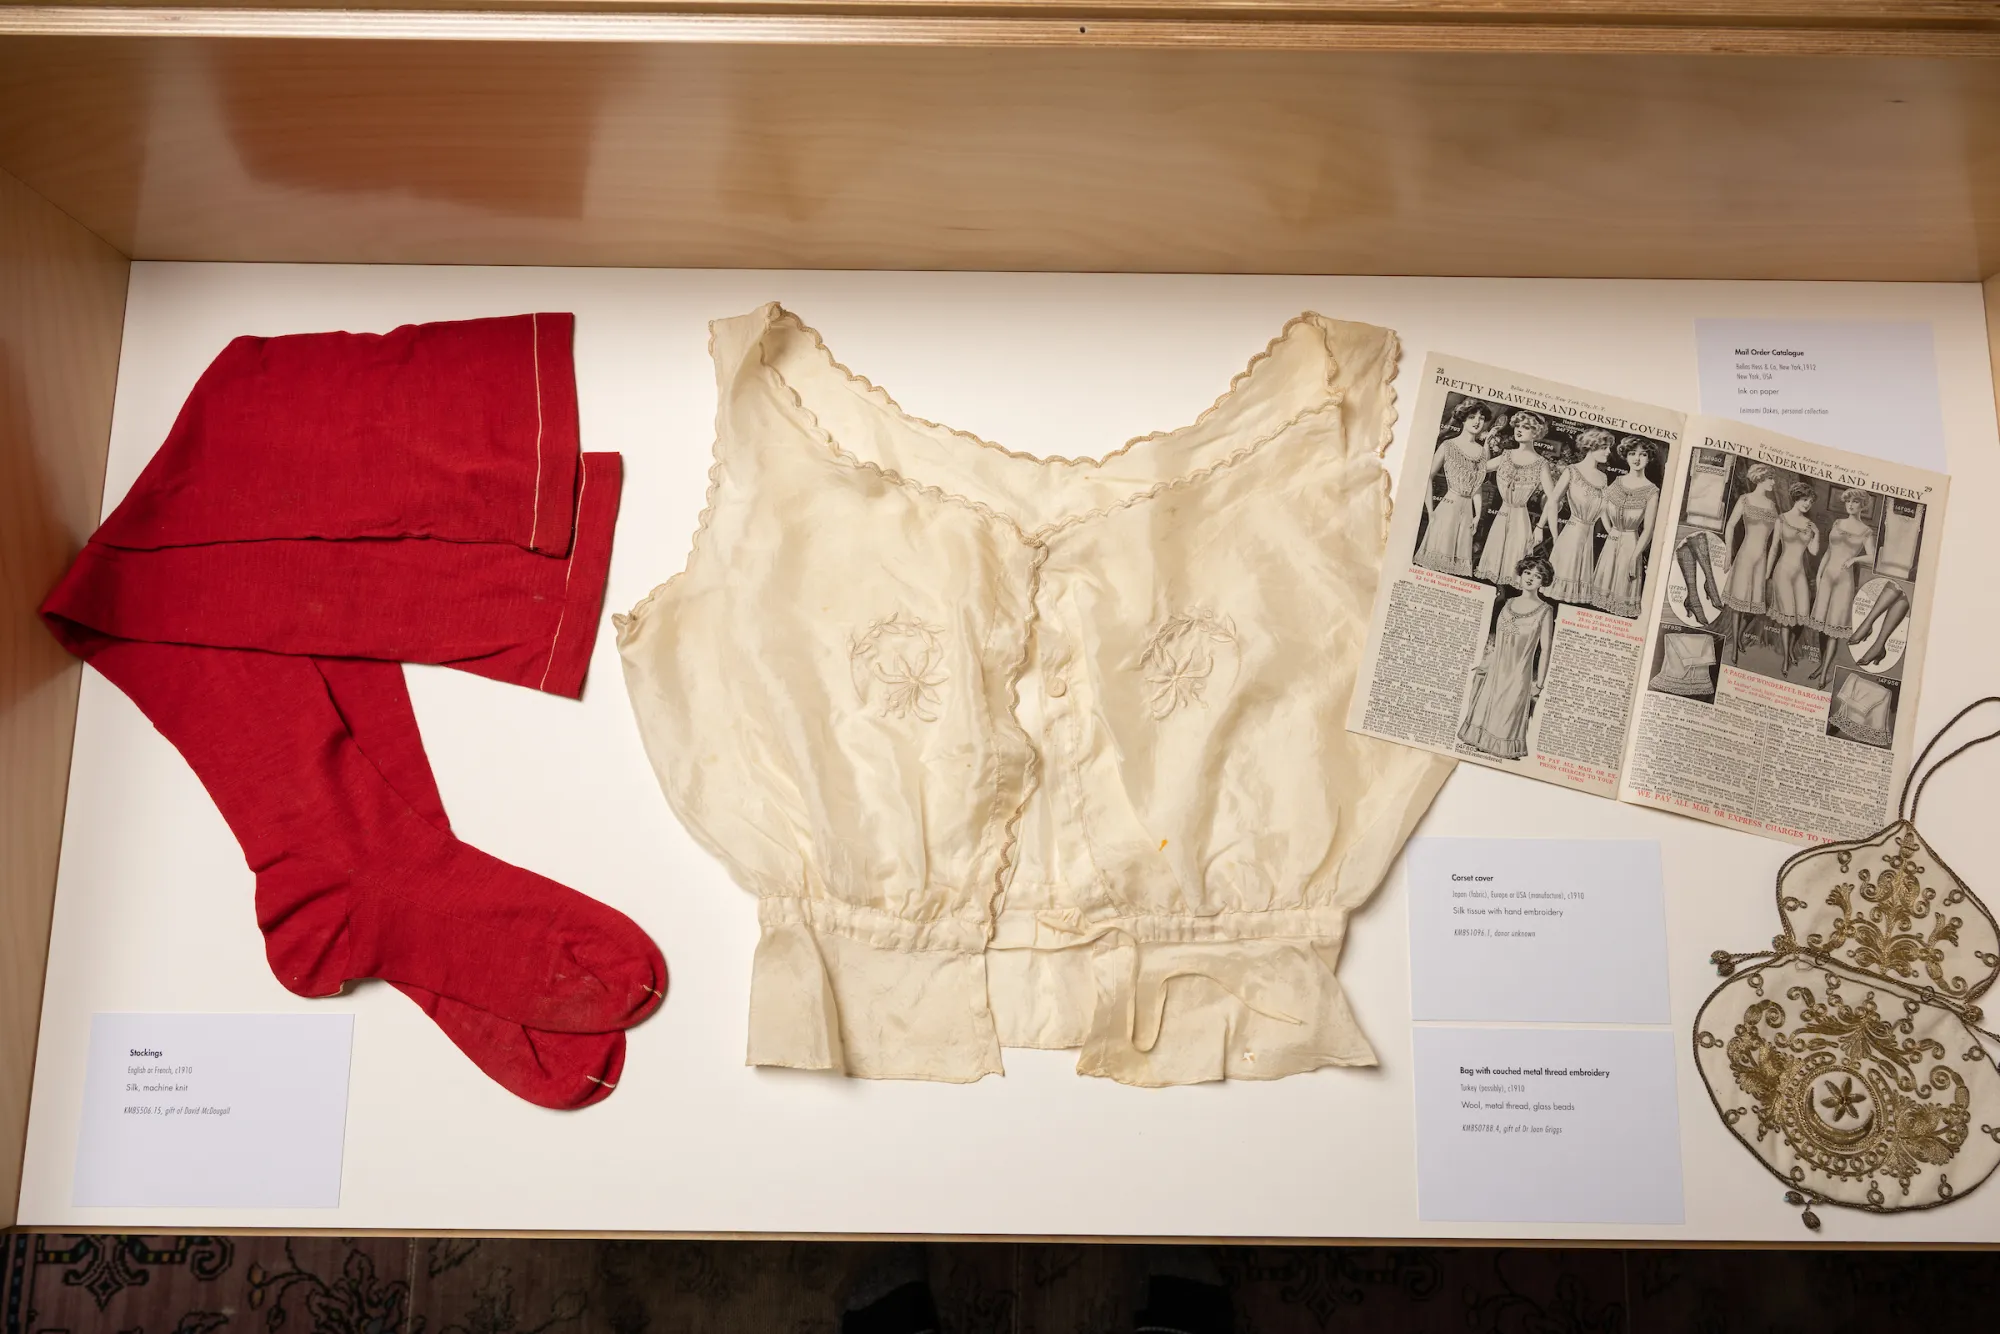 A display case with red stockings, a cream silk corset cover, an open magazine and a decorated bag